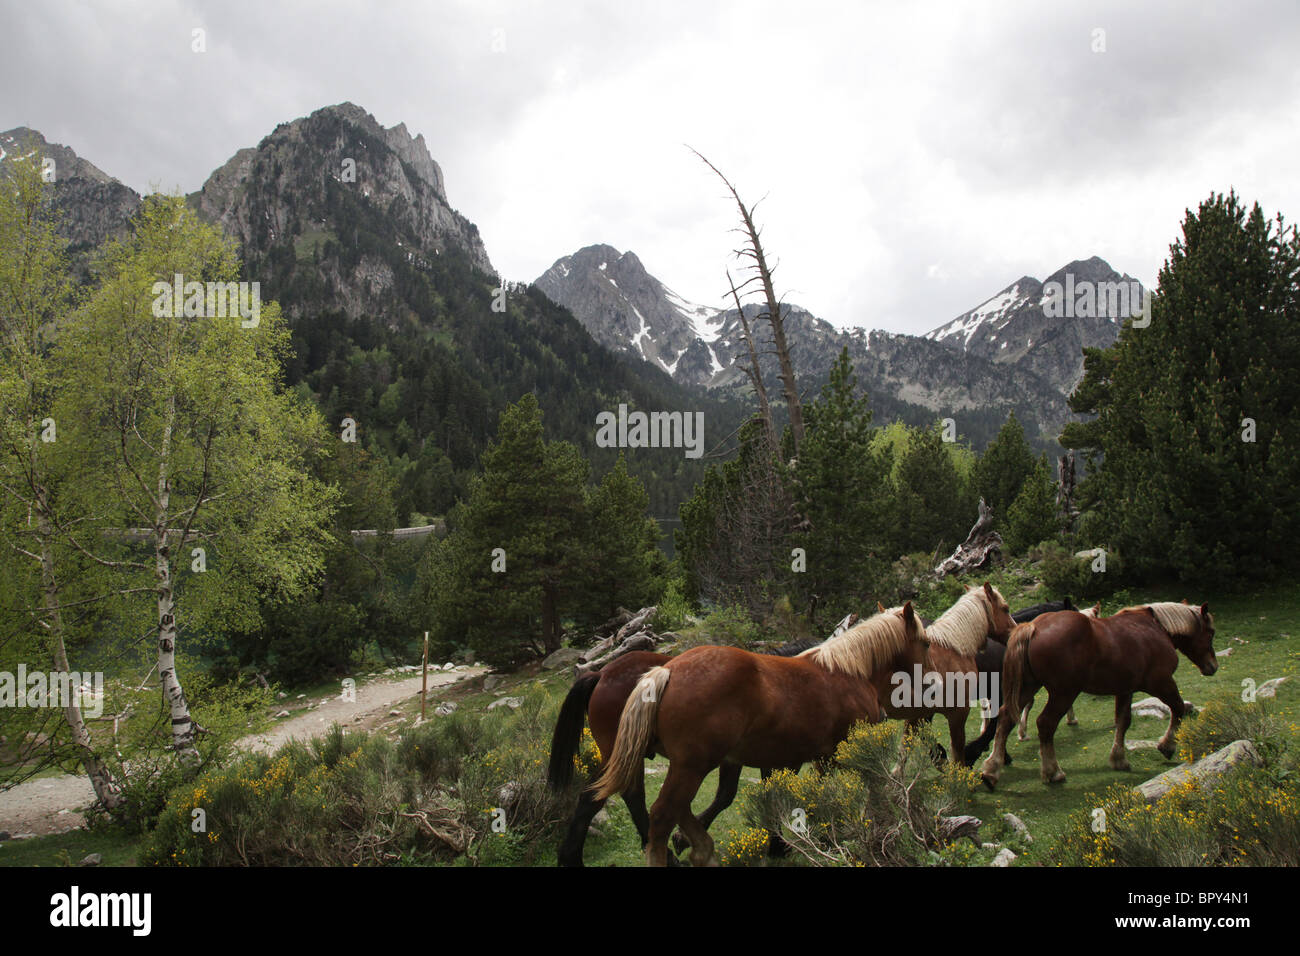 Wild mountain horses in subalpine forest near traverse track Sant Maurici National Park Pyrenees Spain Stock Photo